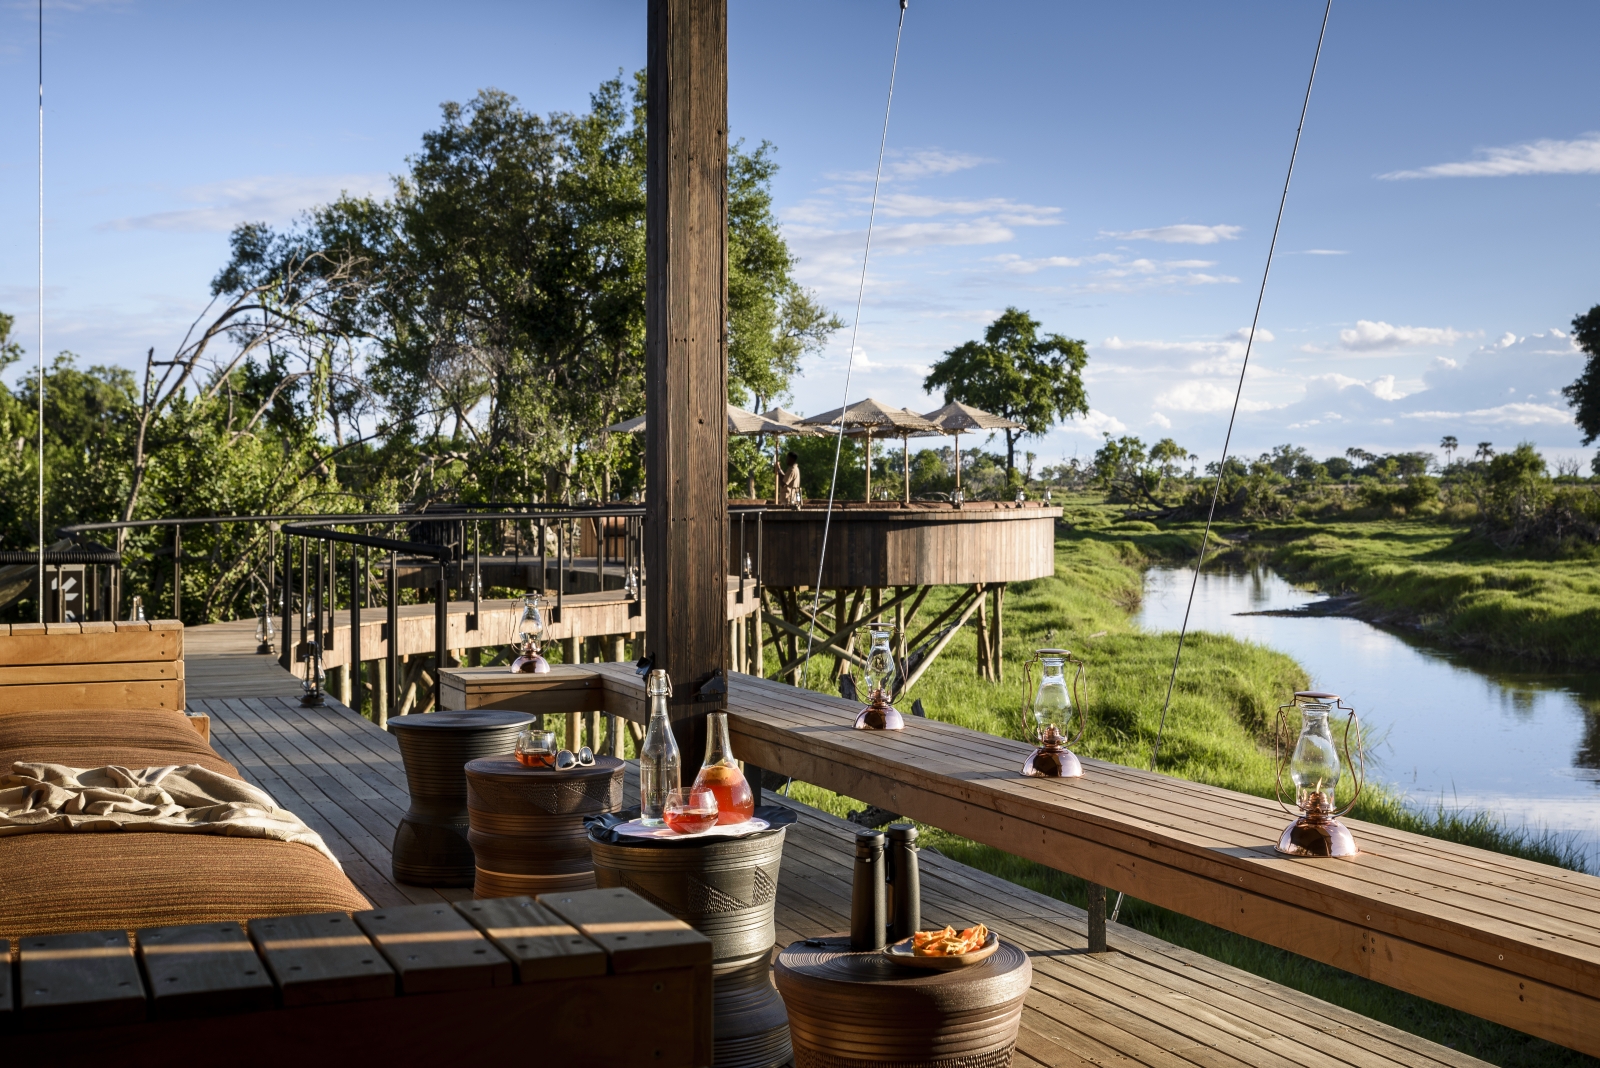 View from the mai ndeck with seating over the waterways and surroundings of the Okavango Delta at Xigera Safari Camp